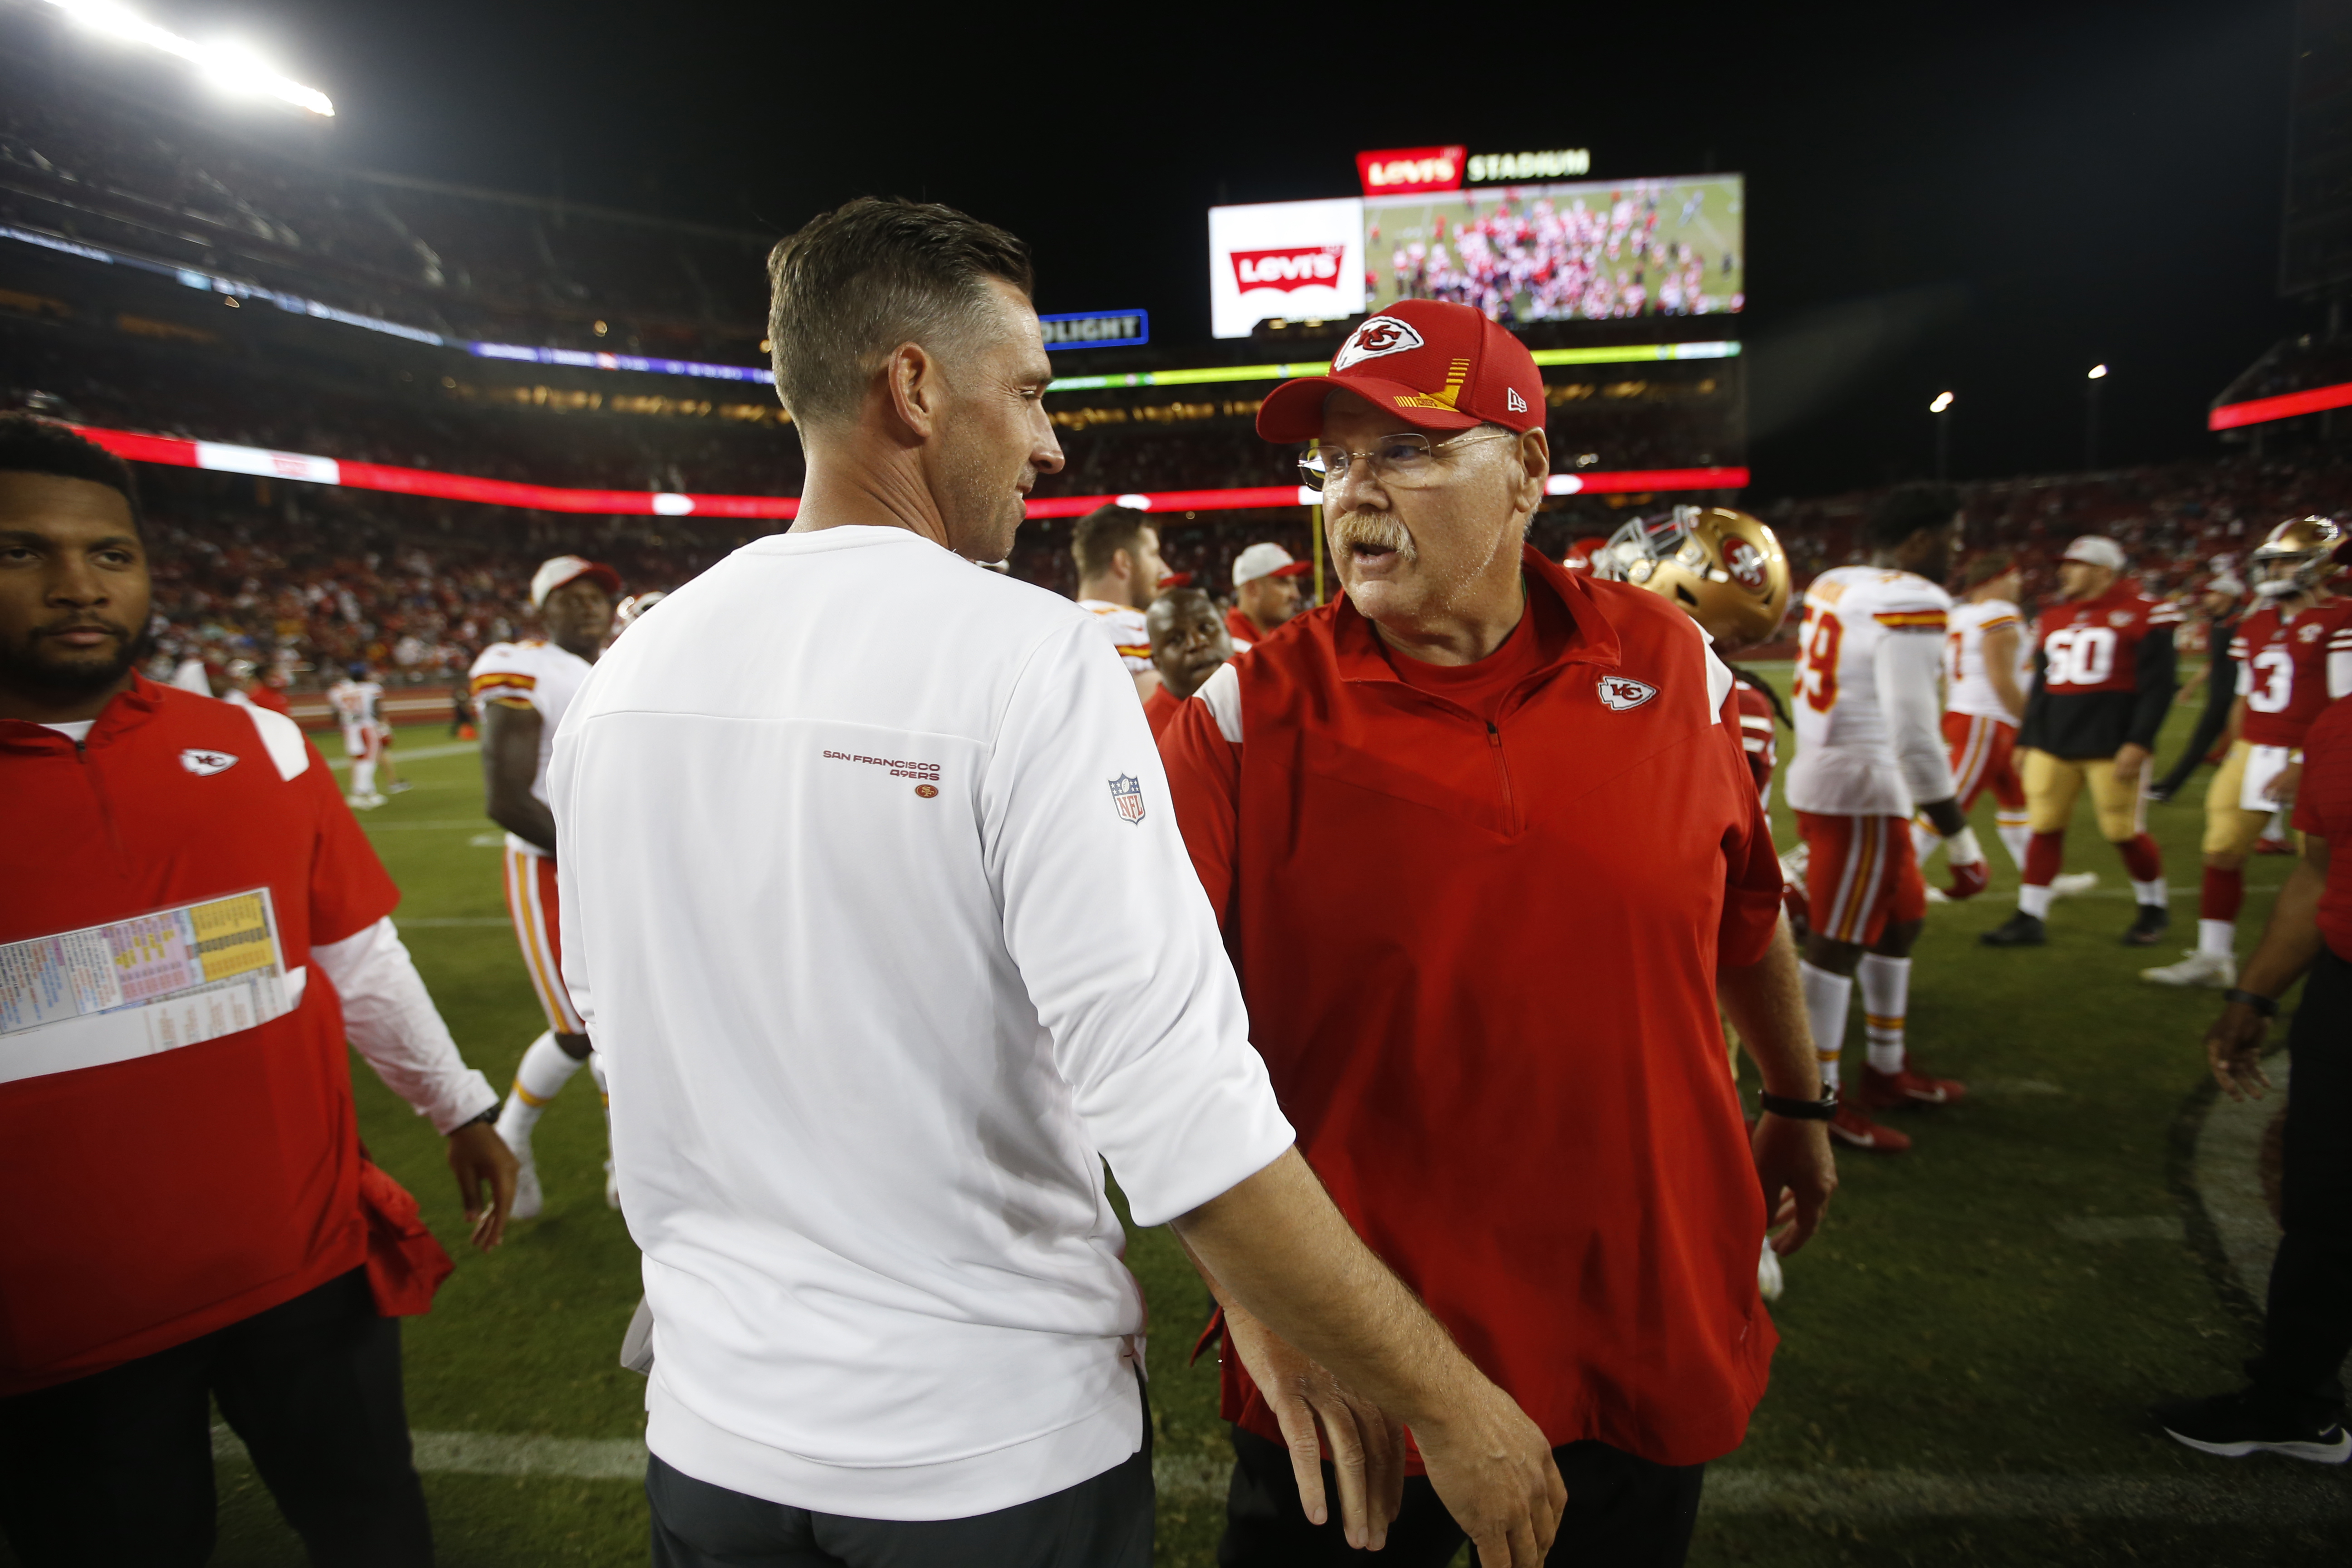 SANTA CLARA, CA - AUGUST 14: Head Coach Kyle Shanahan of the San Francisco 49ers and Head Coach Andy Reid of the Kansas City Chiefs shake hands on the field after the preseason game at Levi's Stadium on August 14, 2021 in Santa Clara, California. The Chiefs defeated the 49ers 19-16. 